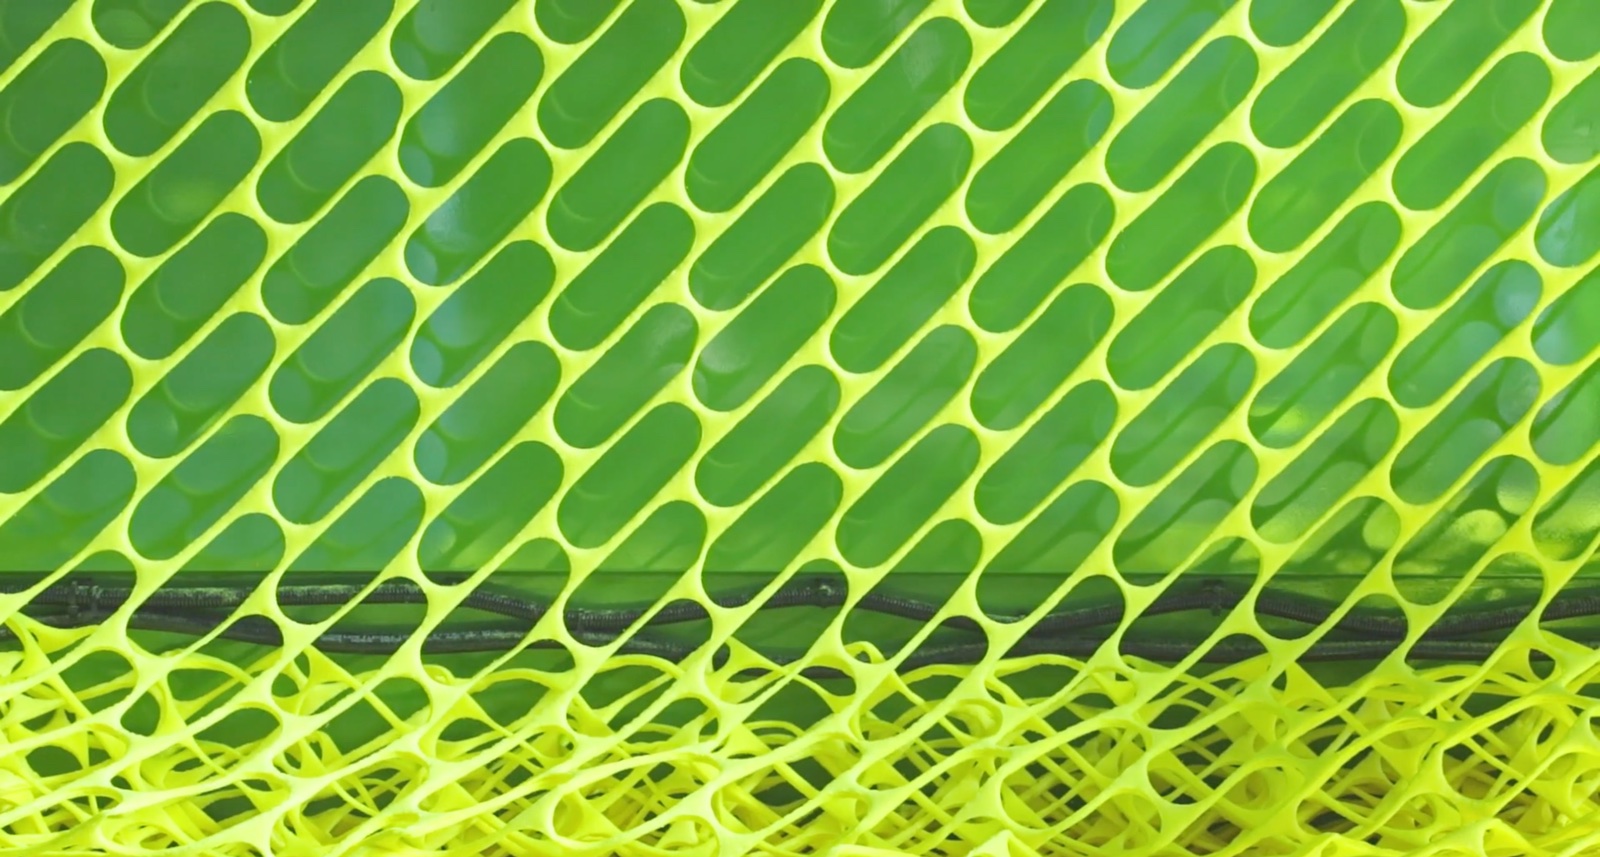 How tennis balls are made